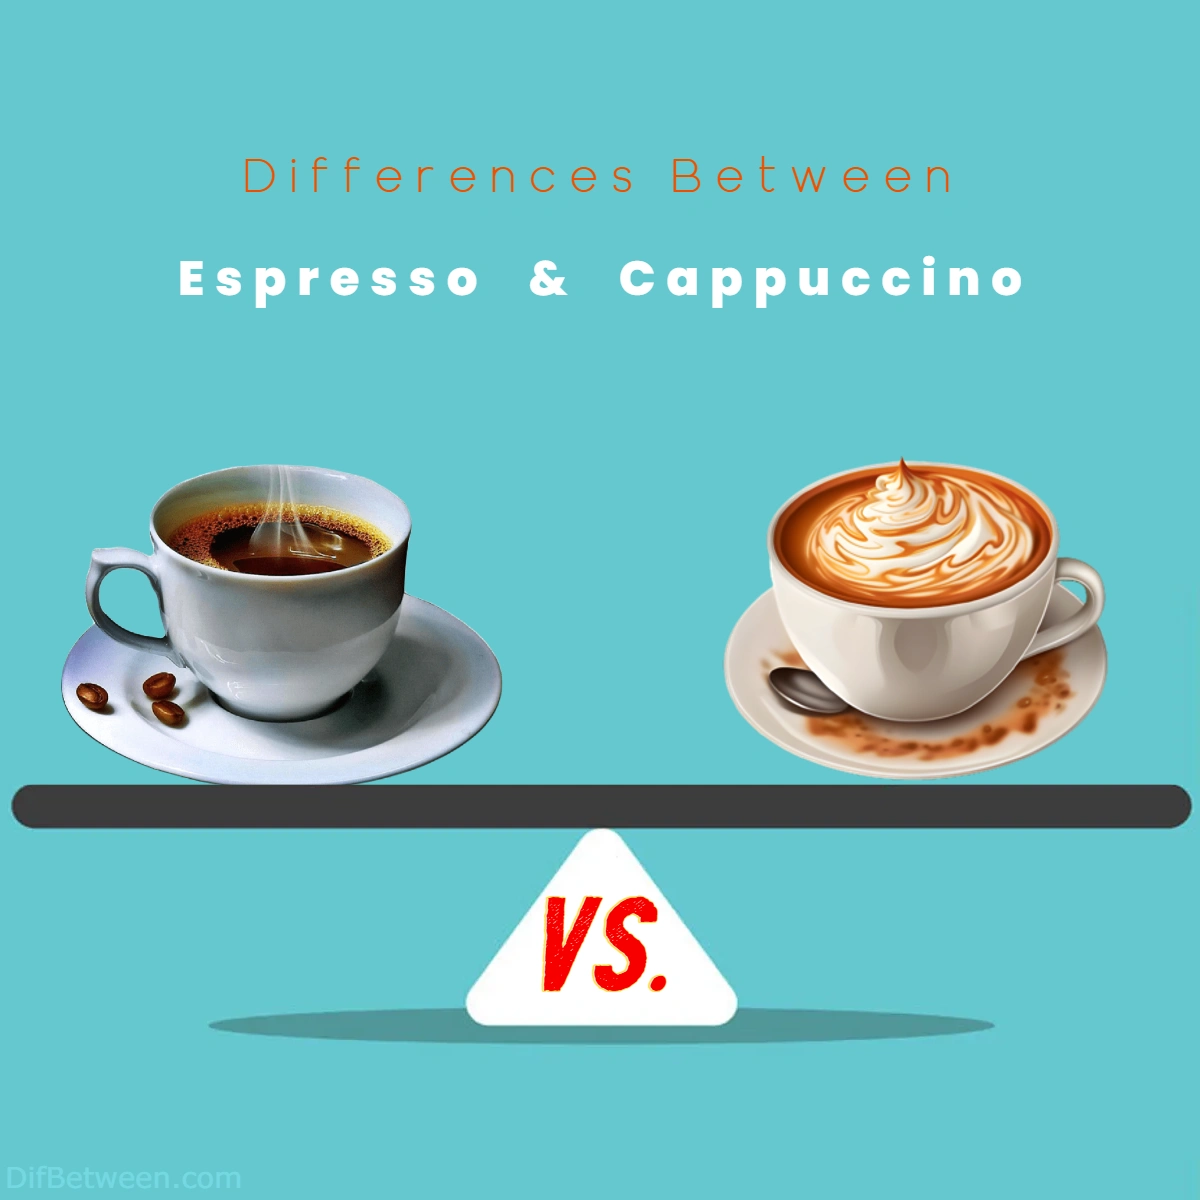 Difference Between Espresso and Cappuccino